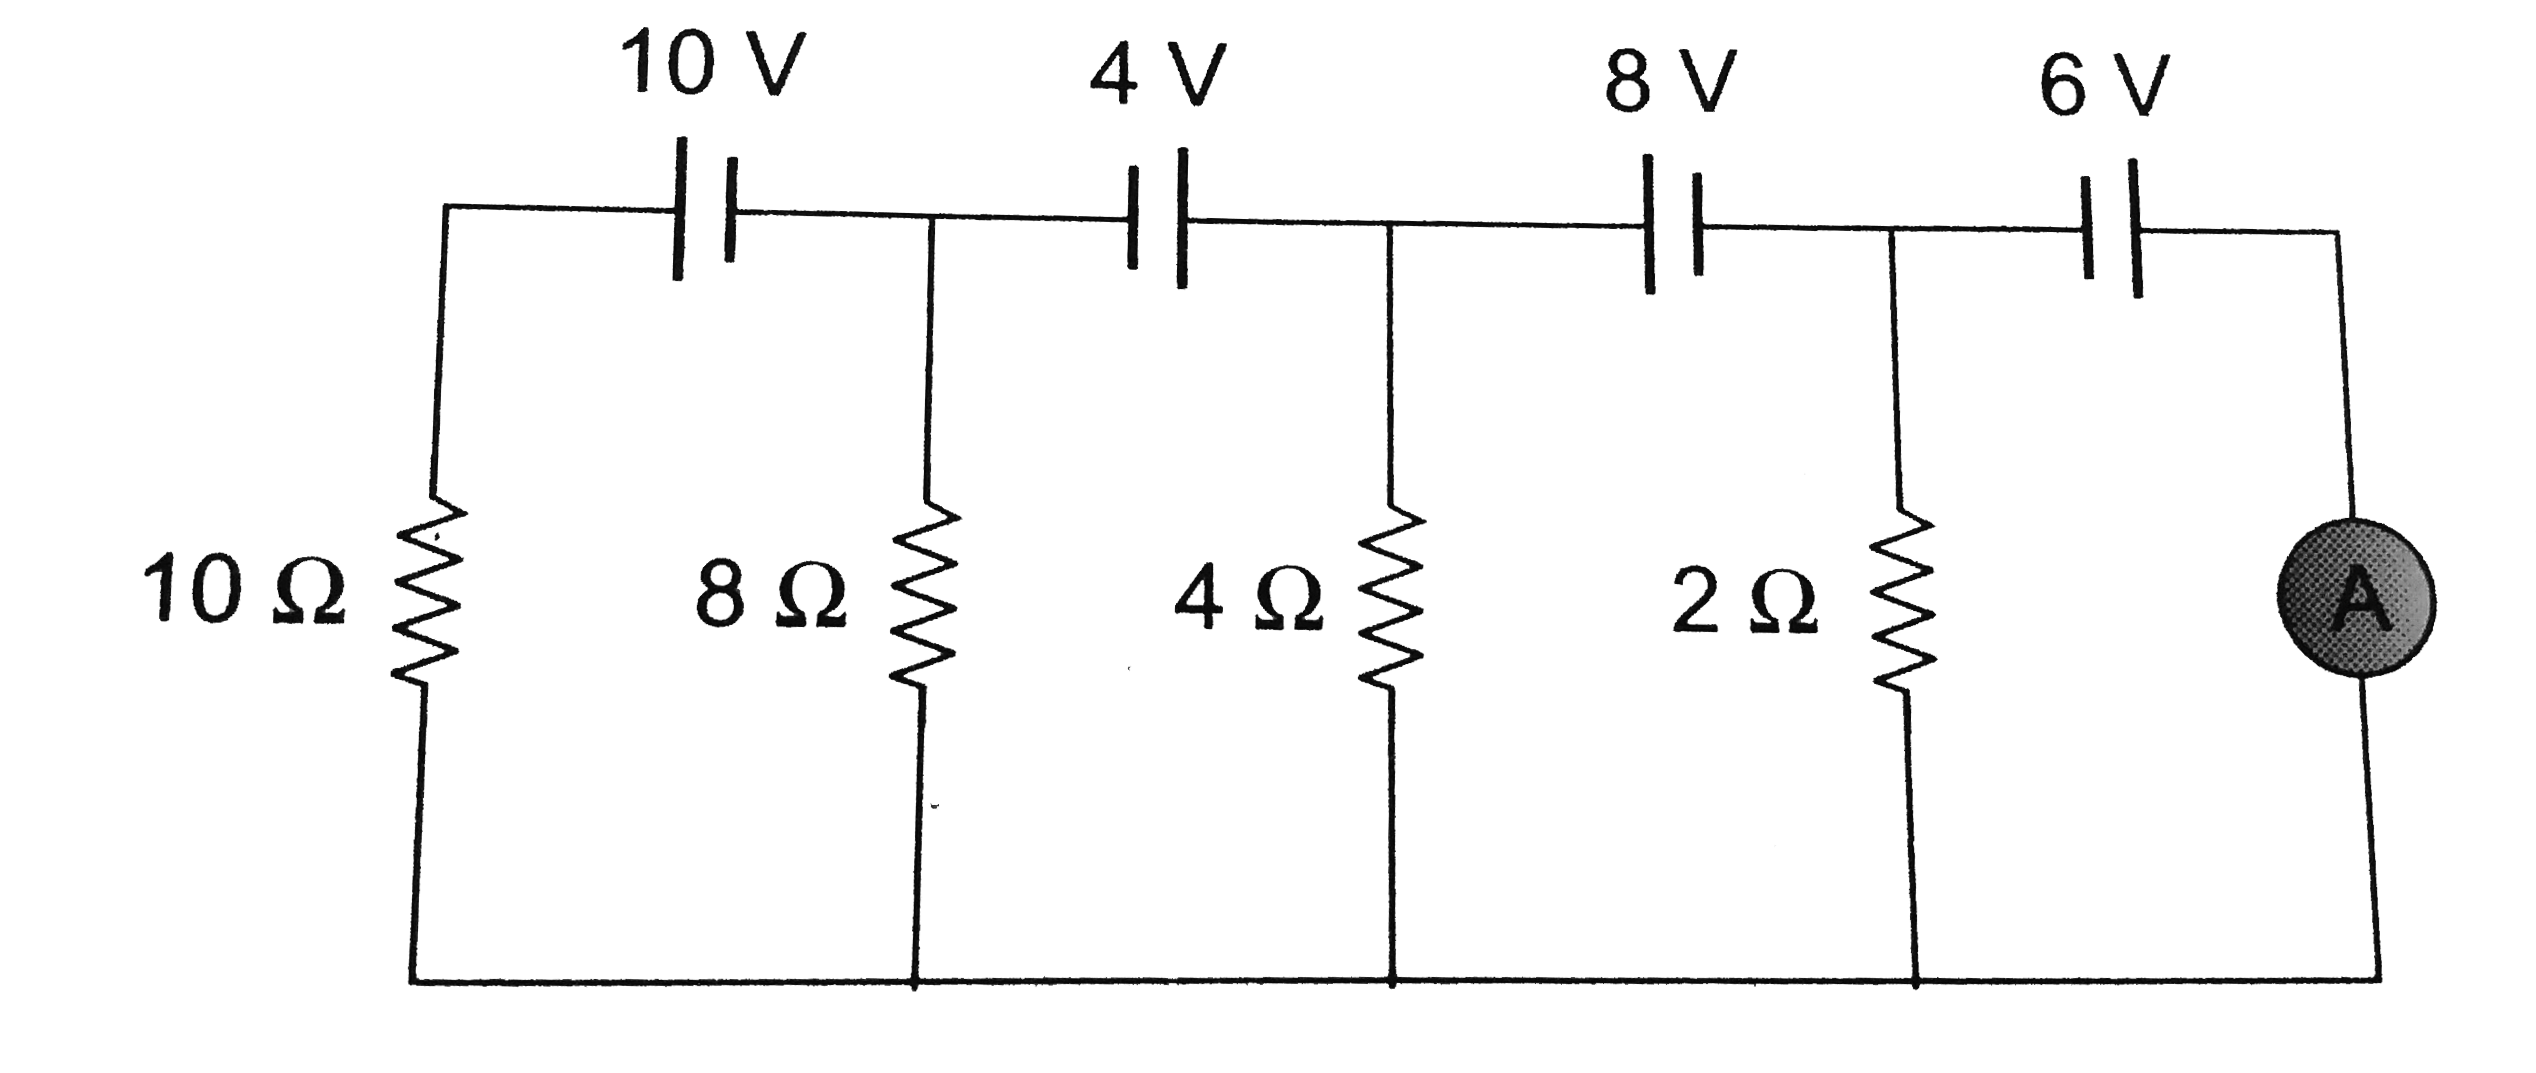 Fing the reading of the ideal ammeter connected in the given circuit. Assume that the cells have negligible internal resistance.